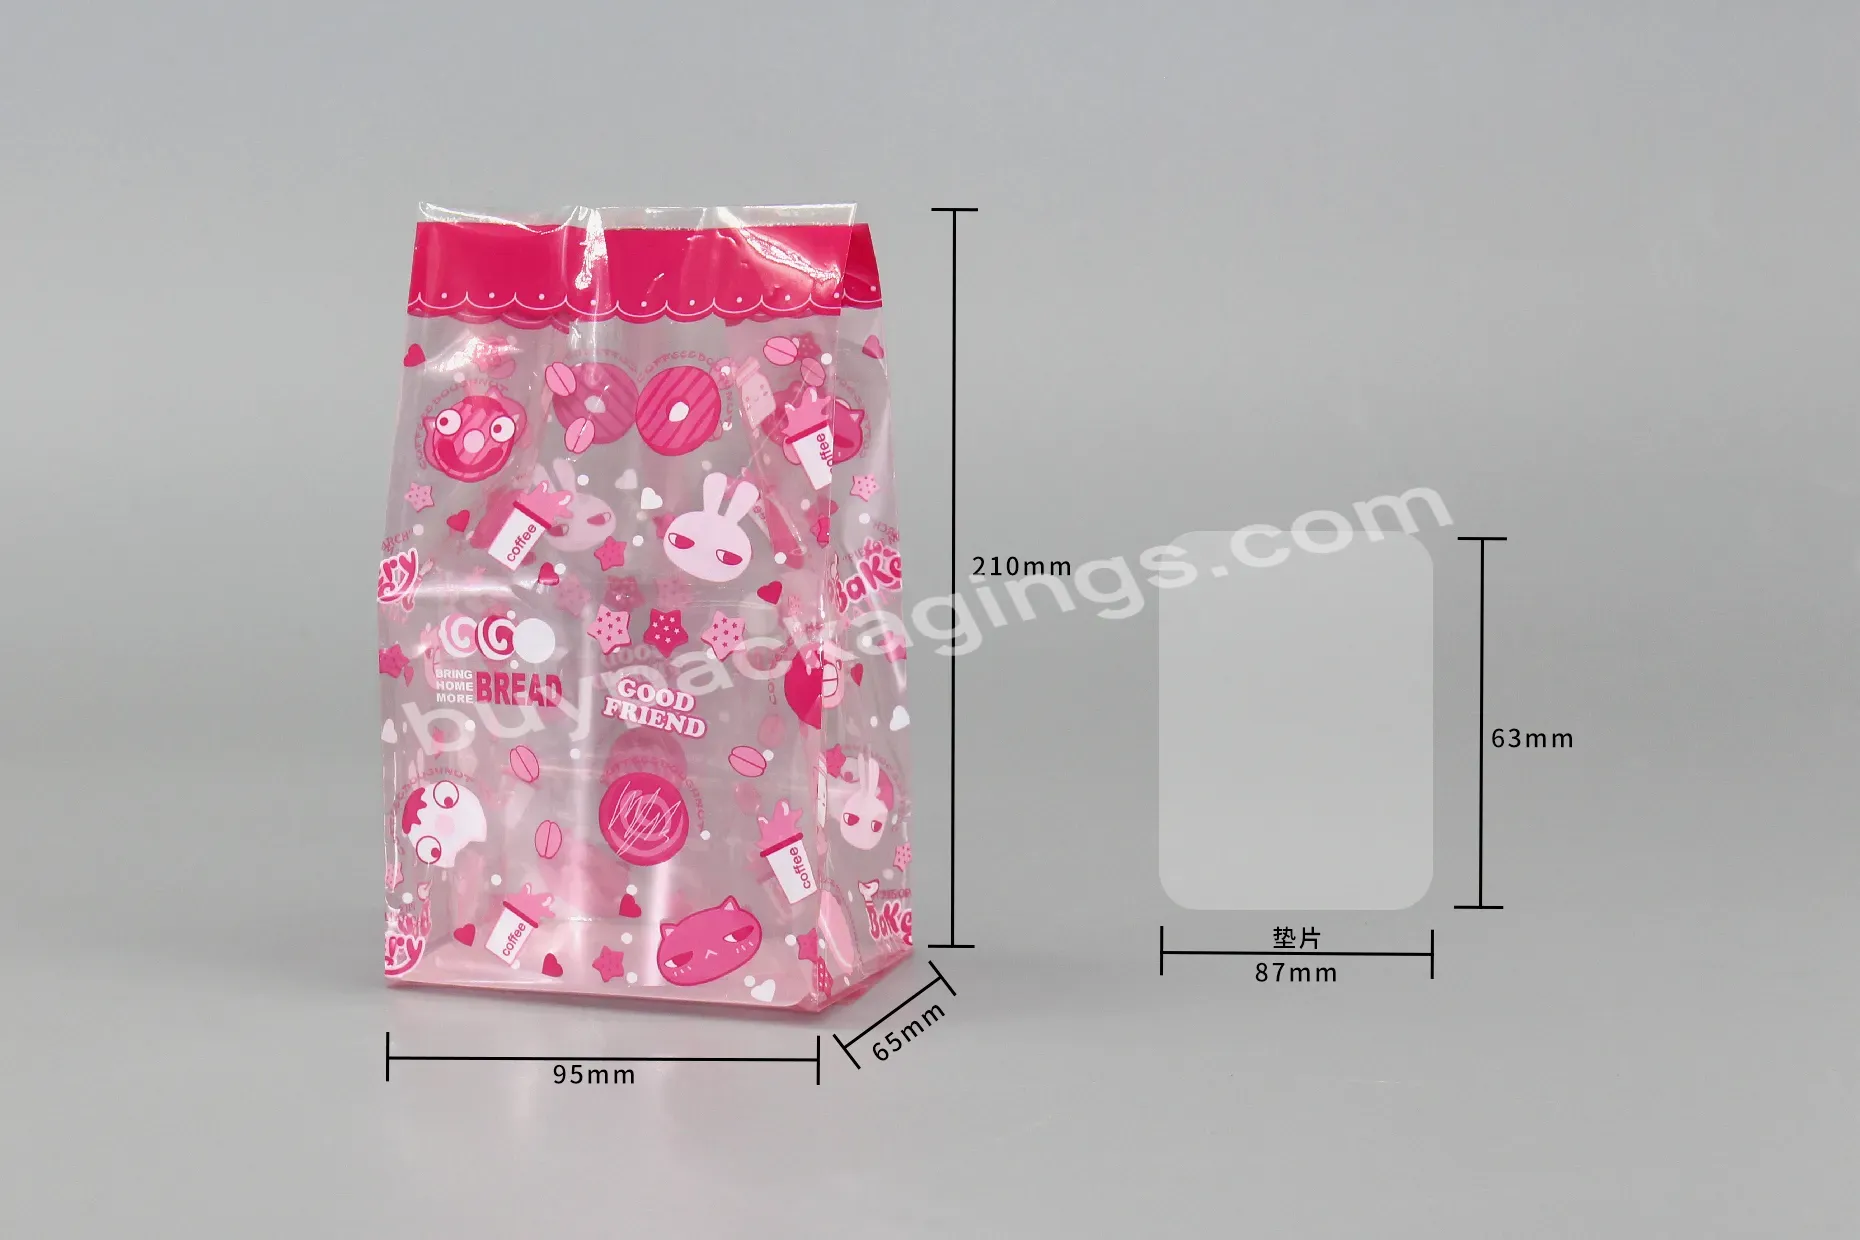 Ready Stock Plastic Packaging Bag For Cookie Packing Gusset Packaging Bag For Food Candy Snack Packing Bakery Packaging Bag - Buy Bakery Packagaing Bag For Food Snack Packing,Side Gusset Plastic Packaging Bag For Cookie Candy Packing,Transparent Plas